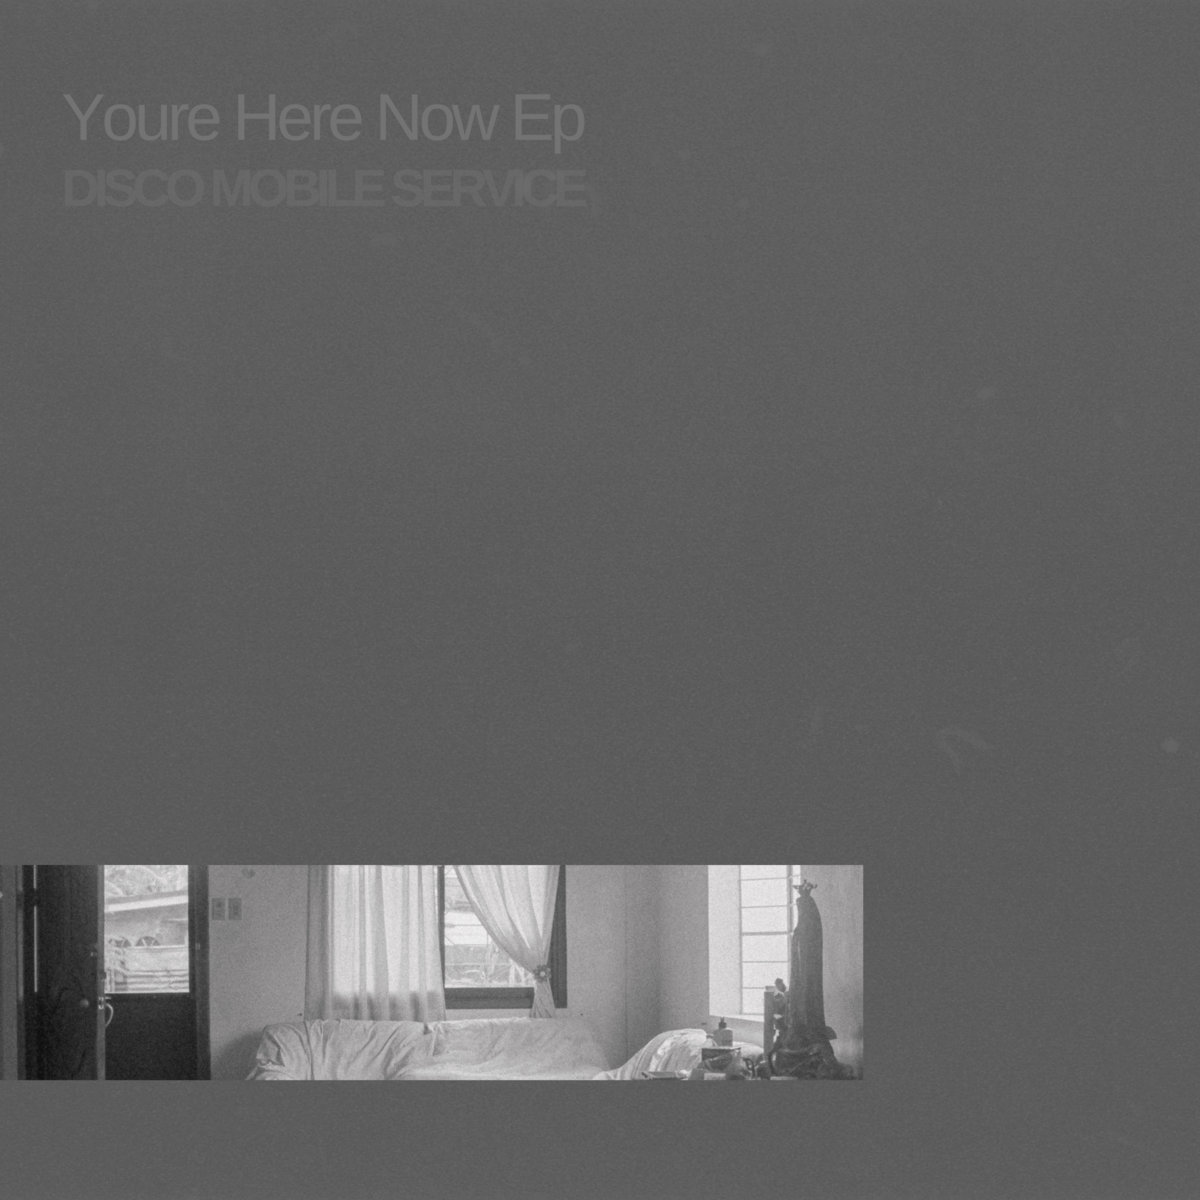 EP REVIEW: Disco Mobile Service – You’re Here Now